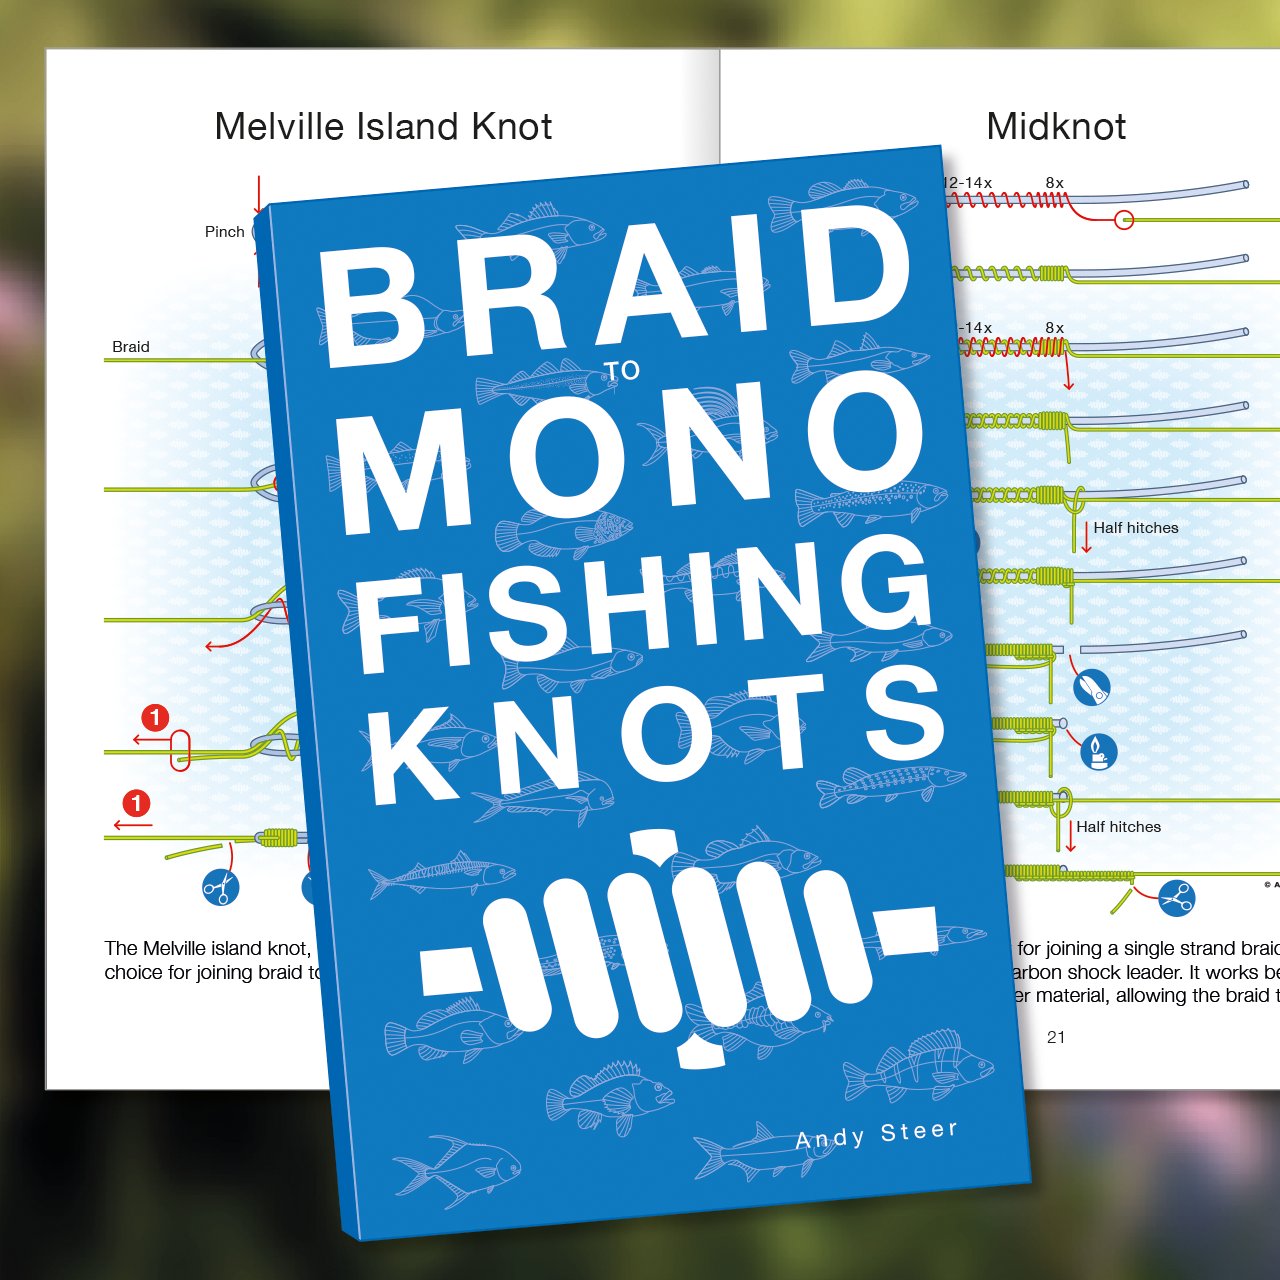 Andy Steer on X: The NEW book Braid to Mono Fishing Knots (printed and  eBook), contains clear, concise, easy to follow step-by-step knot-tying  illustrations of recommended braid to monofilament/fluorocarbon line  connections. Available